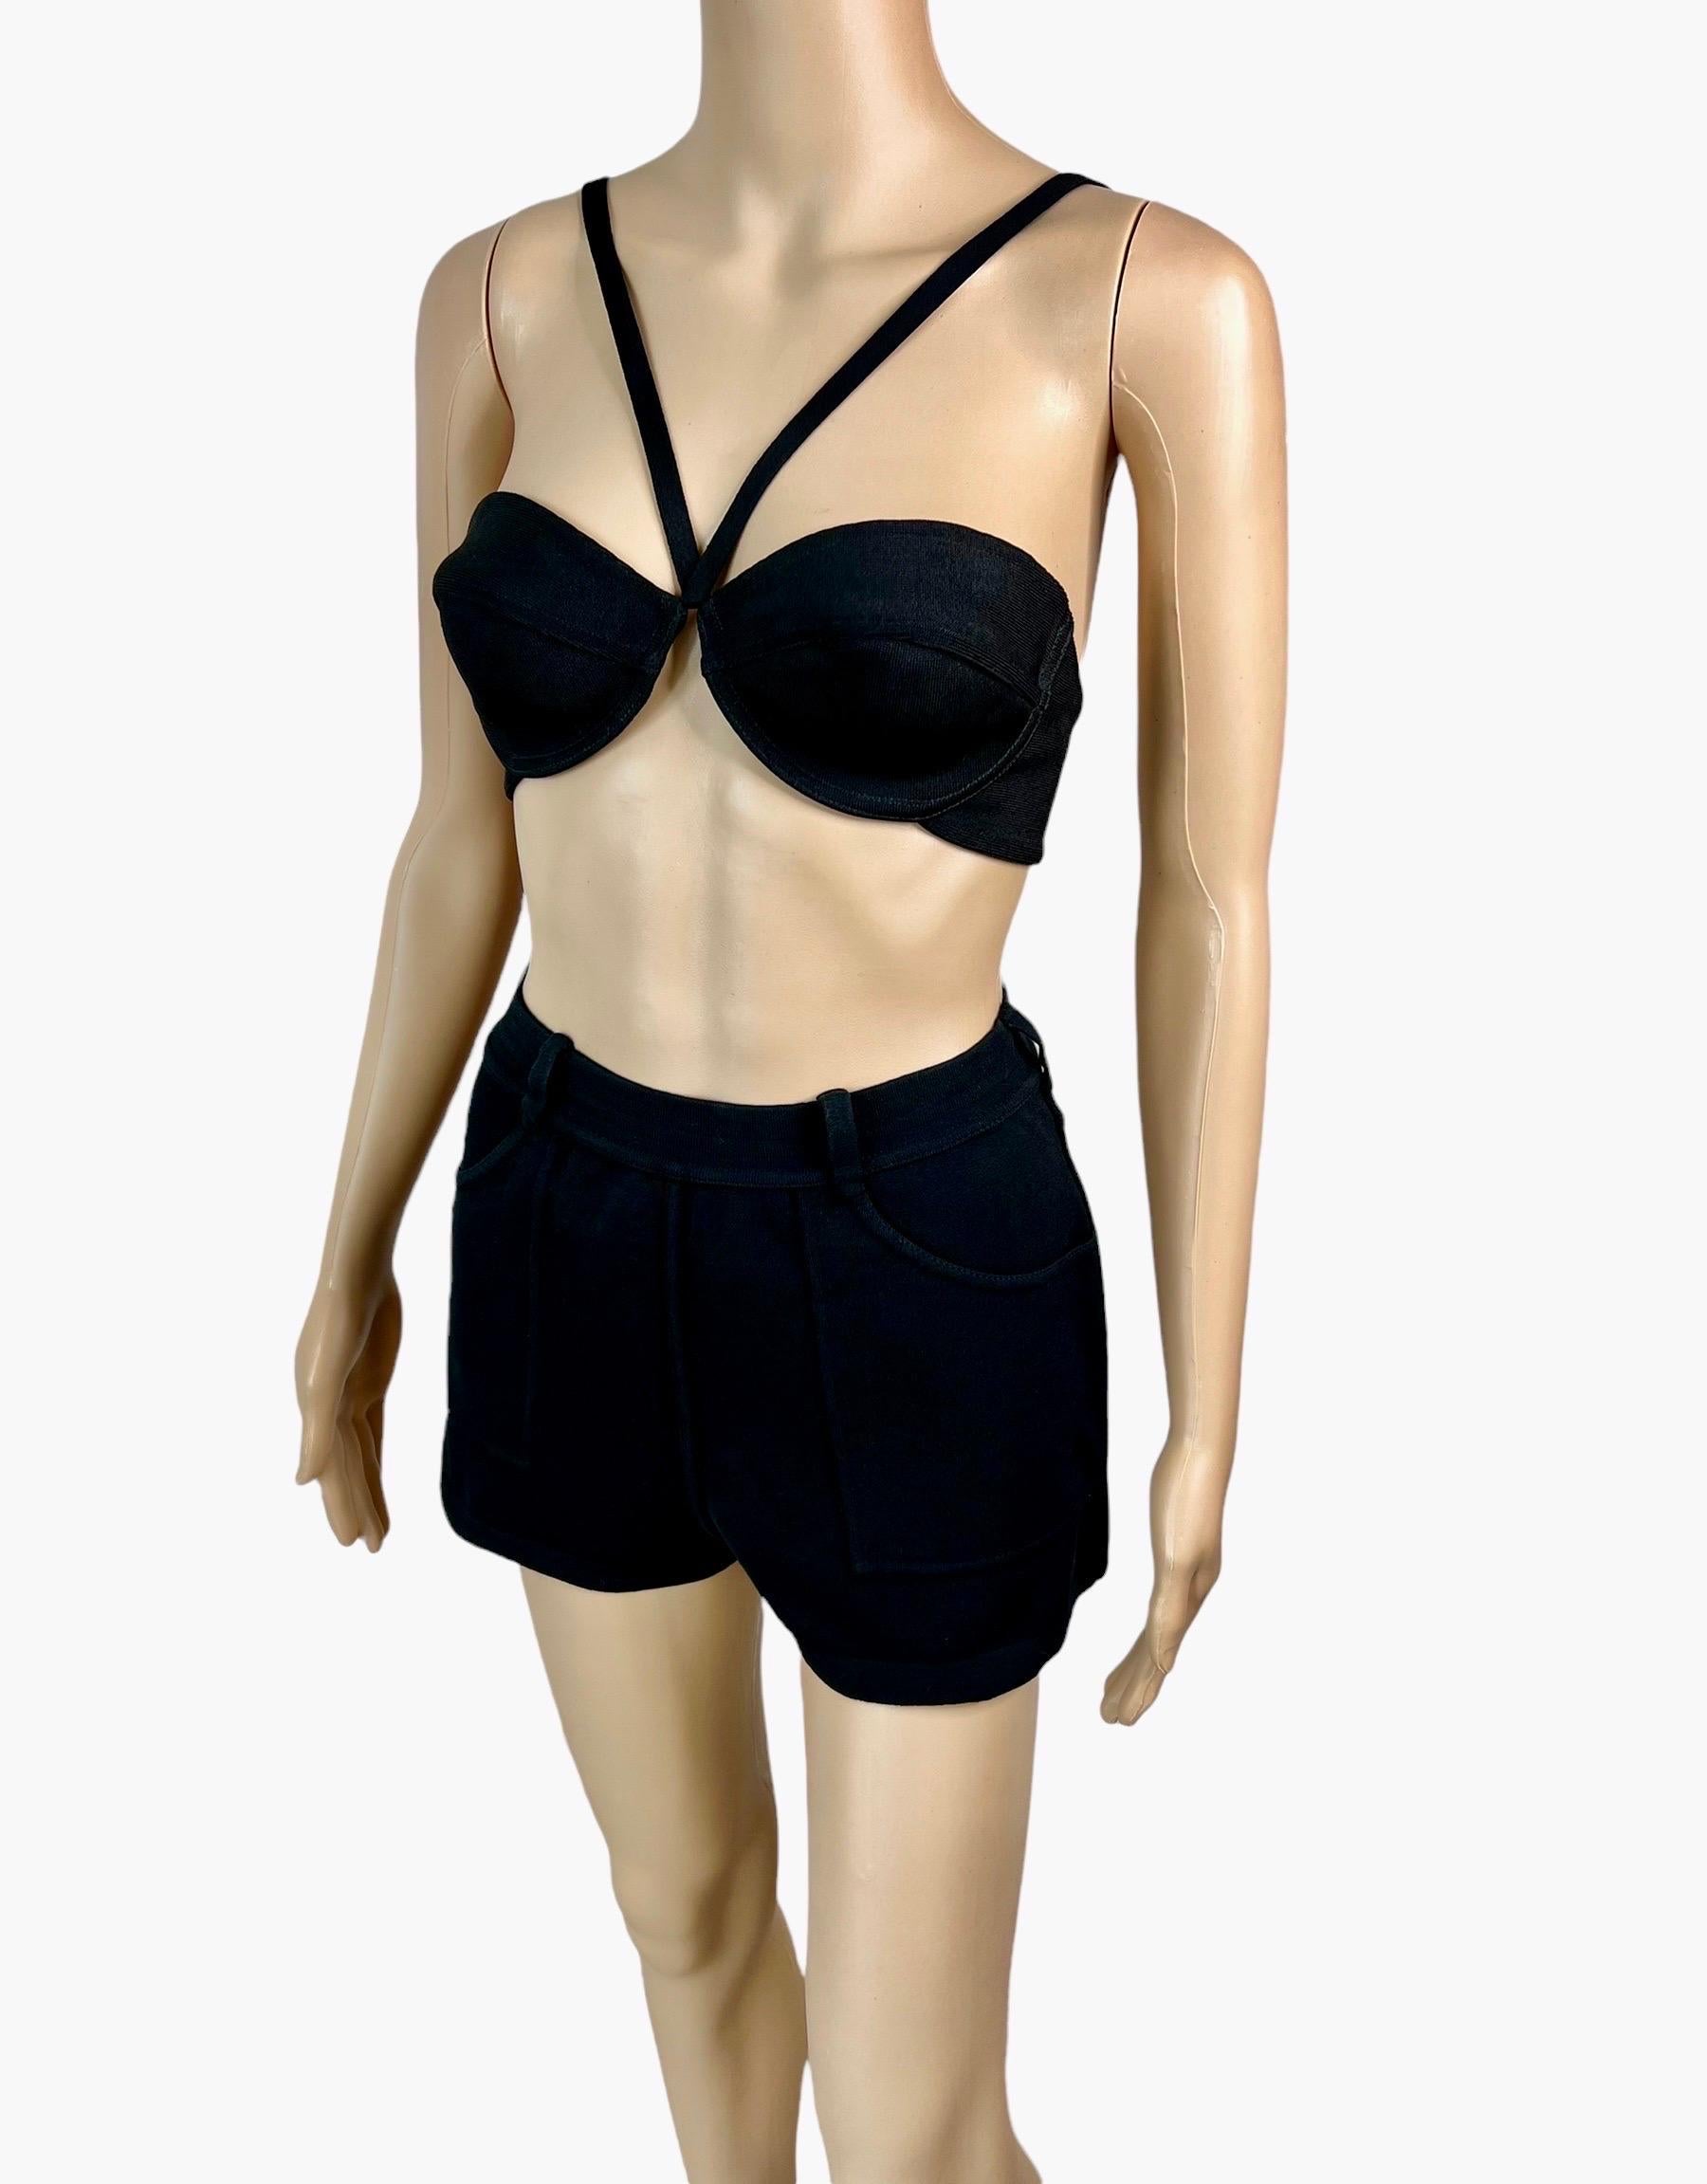 Azzedine Alaia S/S 1990 Vintage Black Shorts and Bra Bralette Crop Top Ensemble 2 Piece Set XS/S

Please note the shorts are size S and the bra is size XS.
